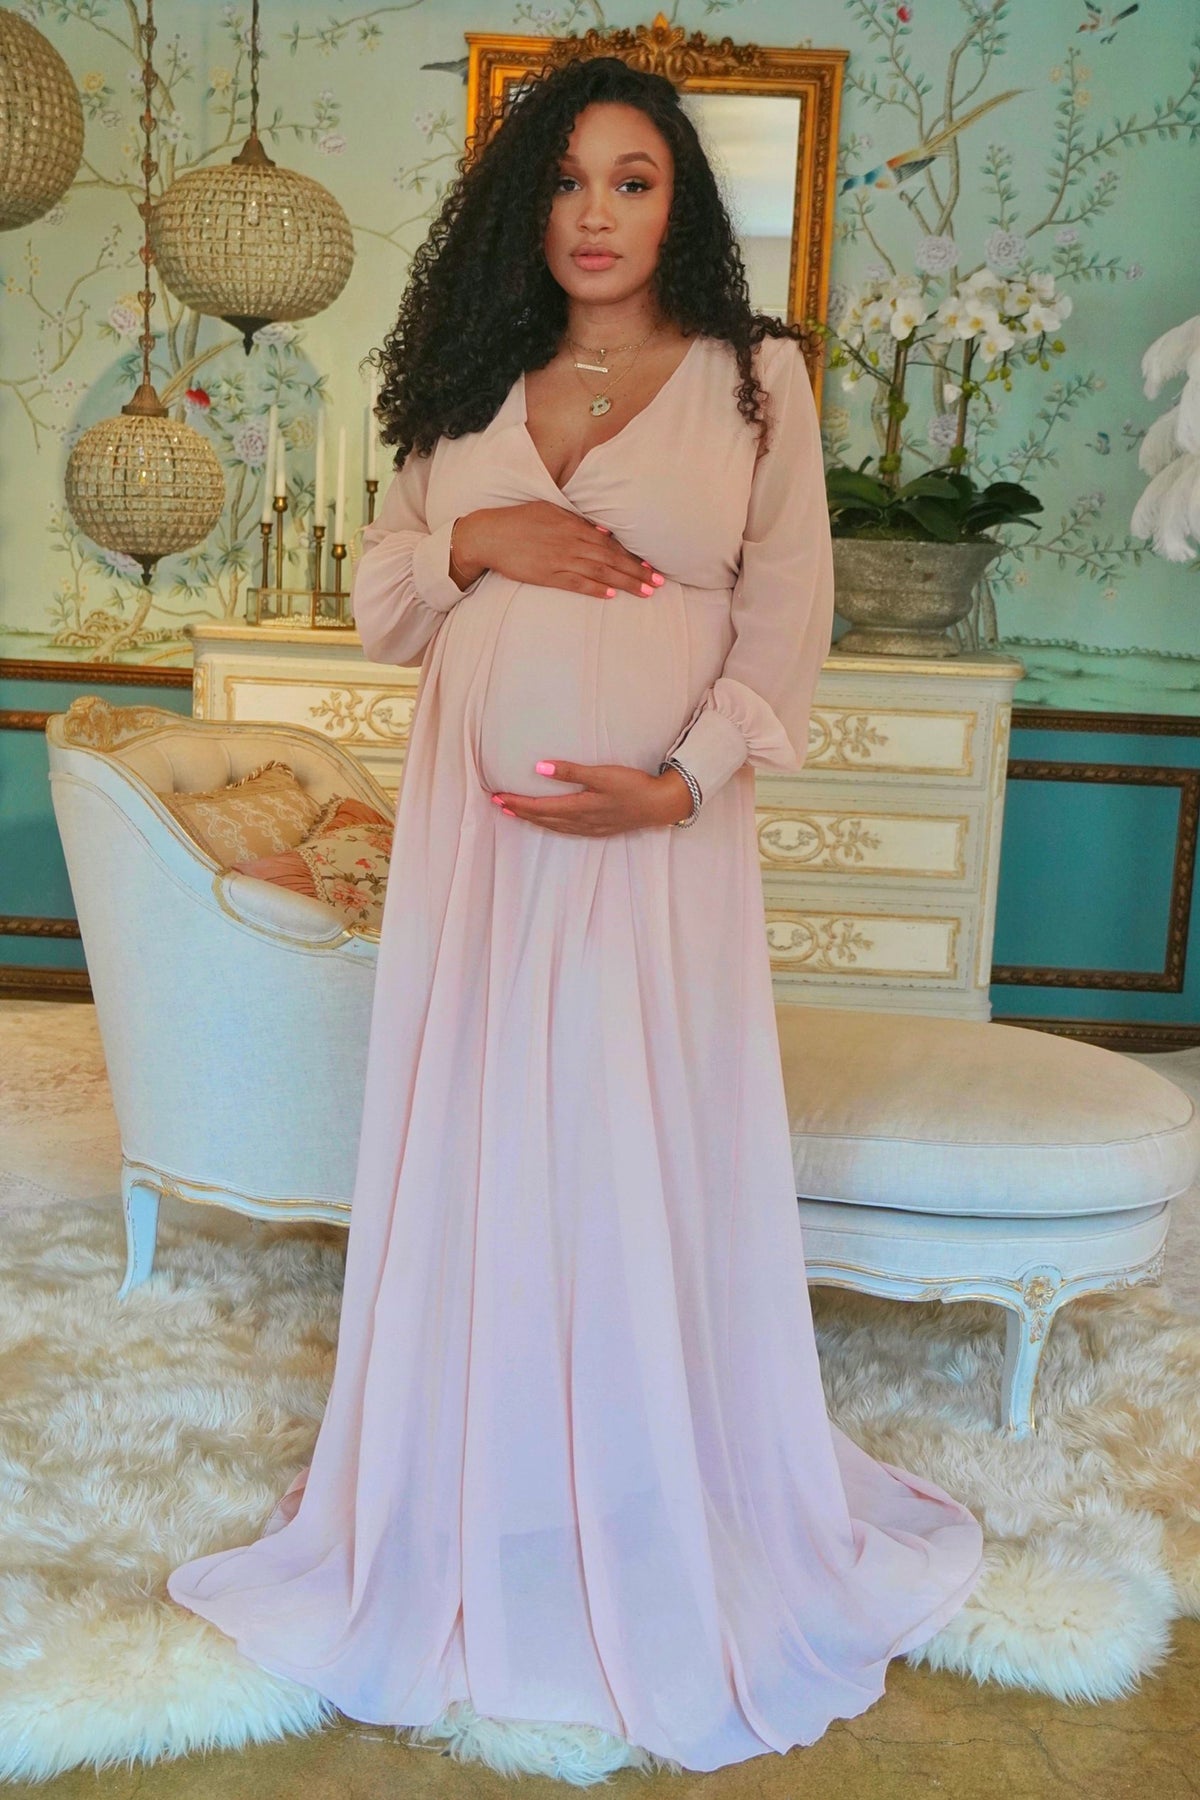 Luxury Pink Maternity Gown, Pregnant guest, Baby shower – Chic Bump Club